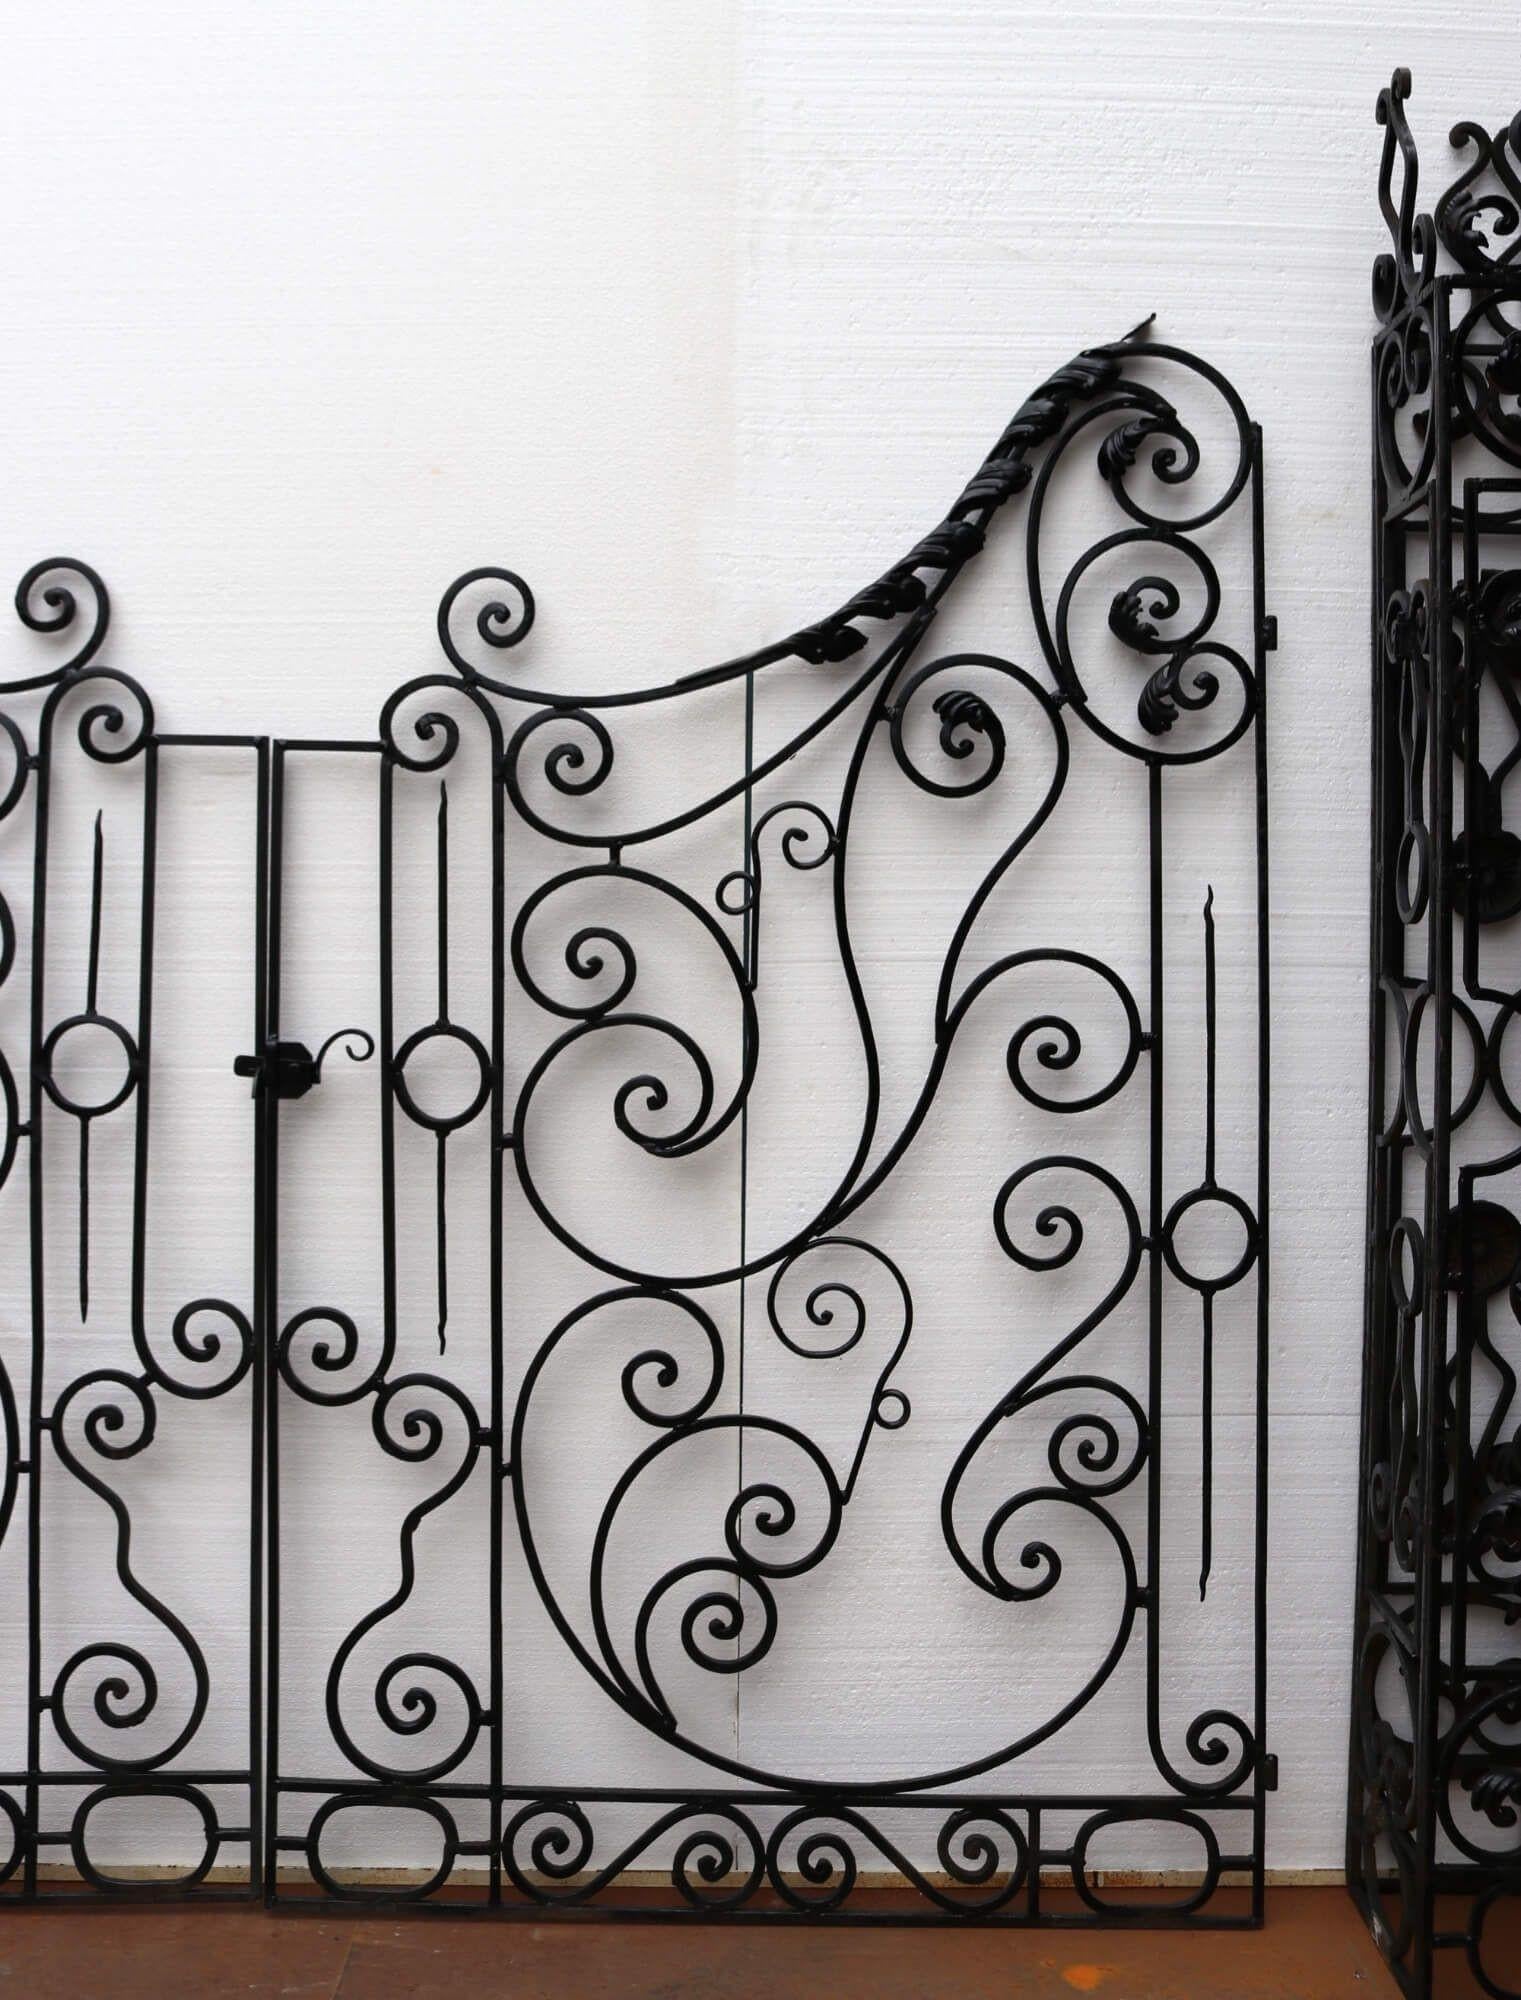 English Set of Ornate Wrought Iron Driveway Gates and Posts 288 cm (9’5”) For Sale